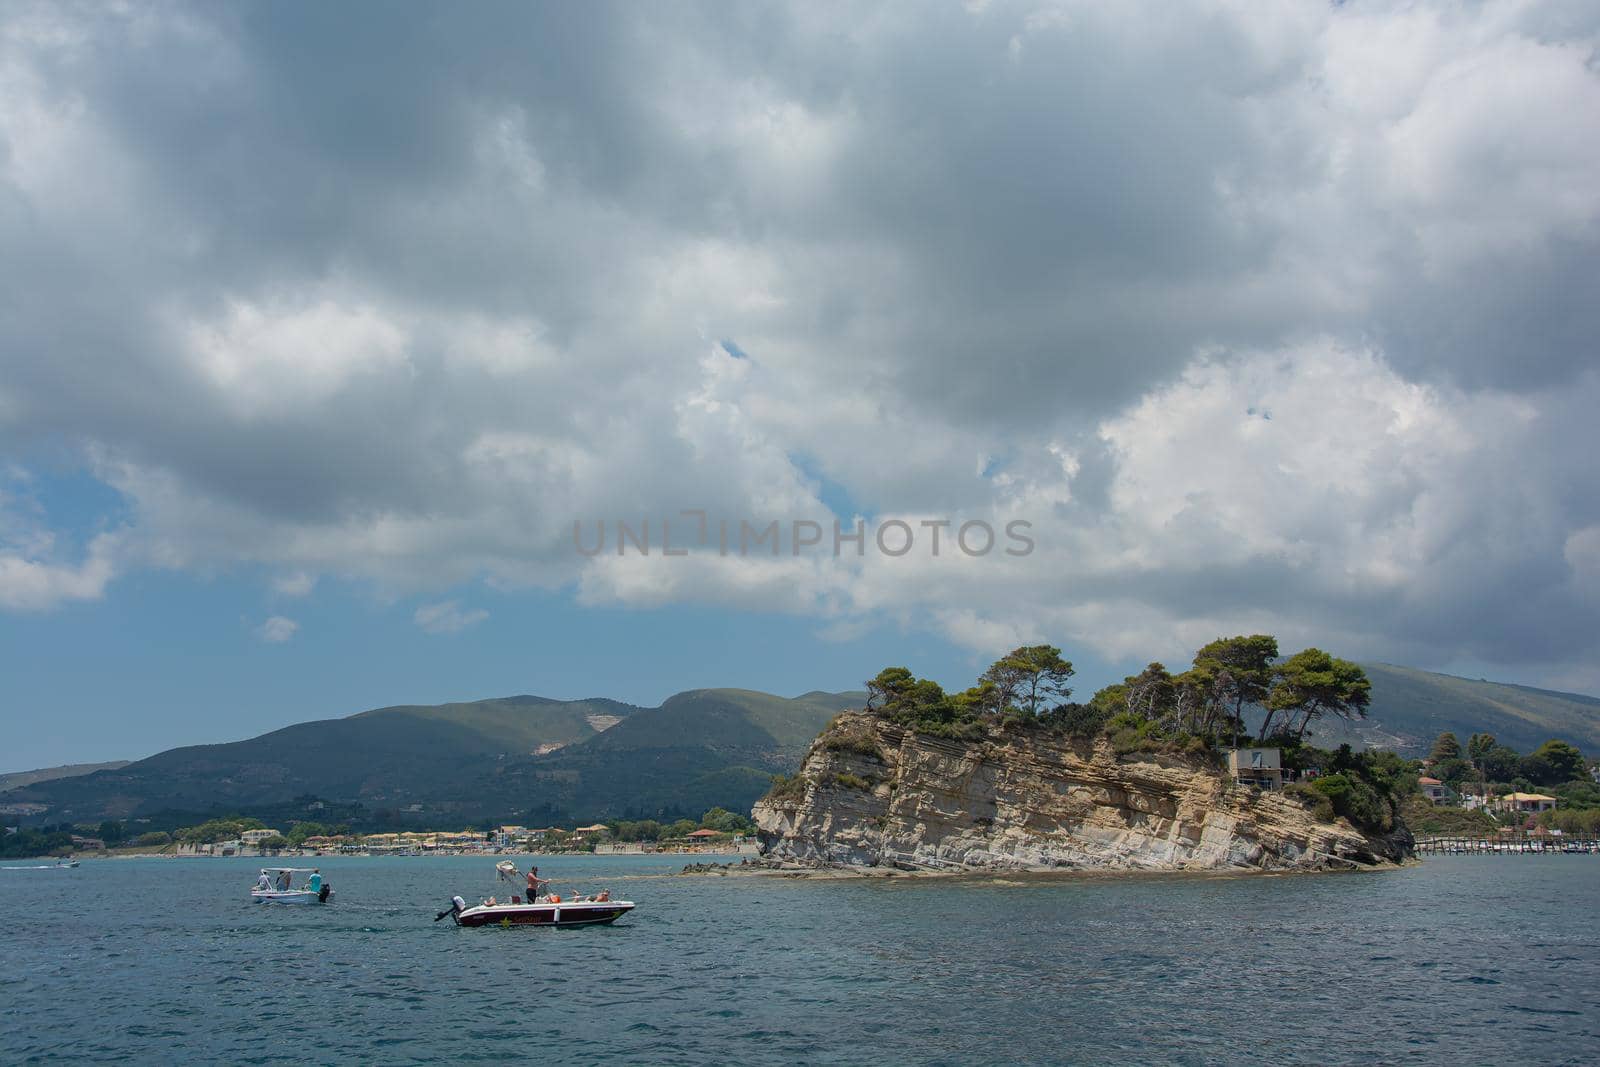 Laganas, Greece - 06/11/2016: Seascape. Motor boats with vacationers and tourists near the island